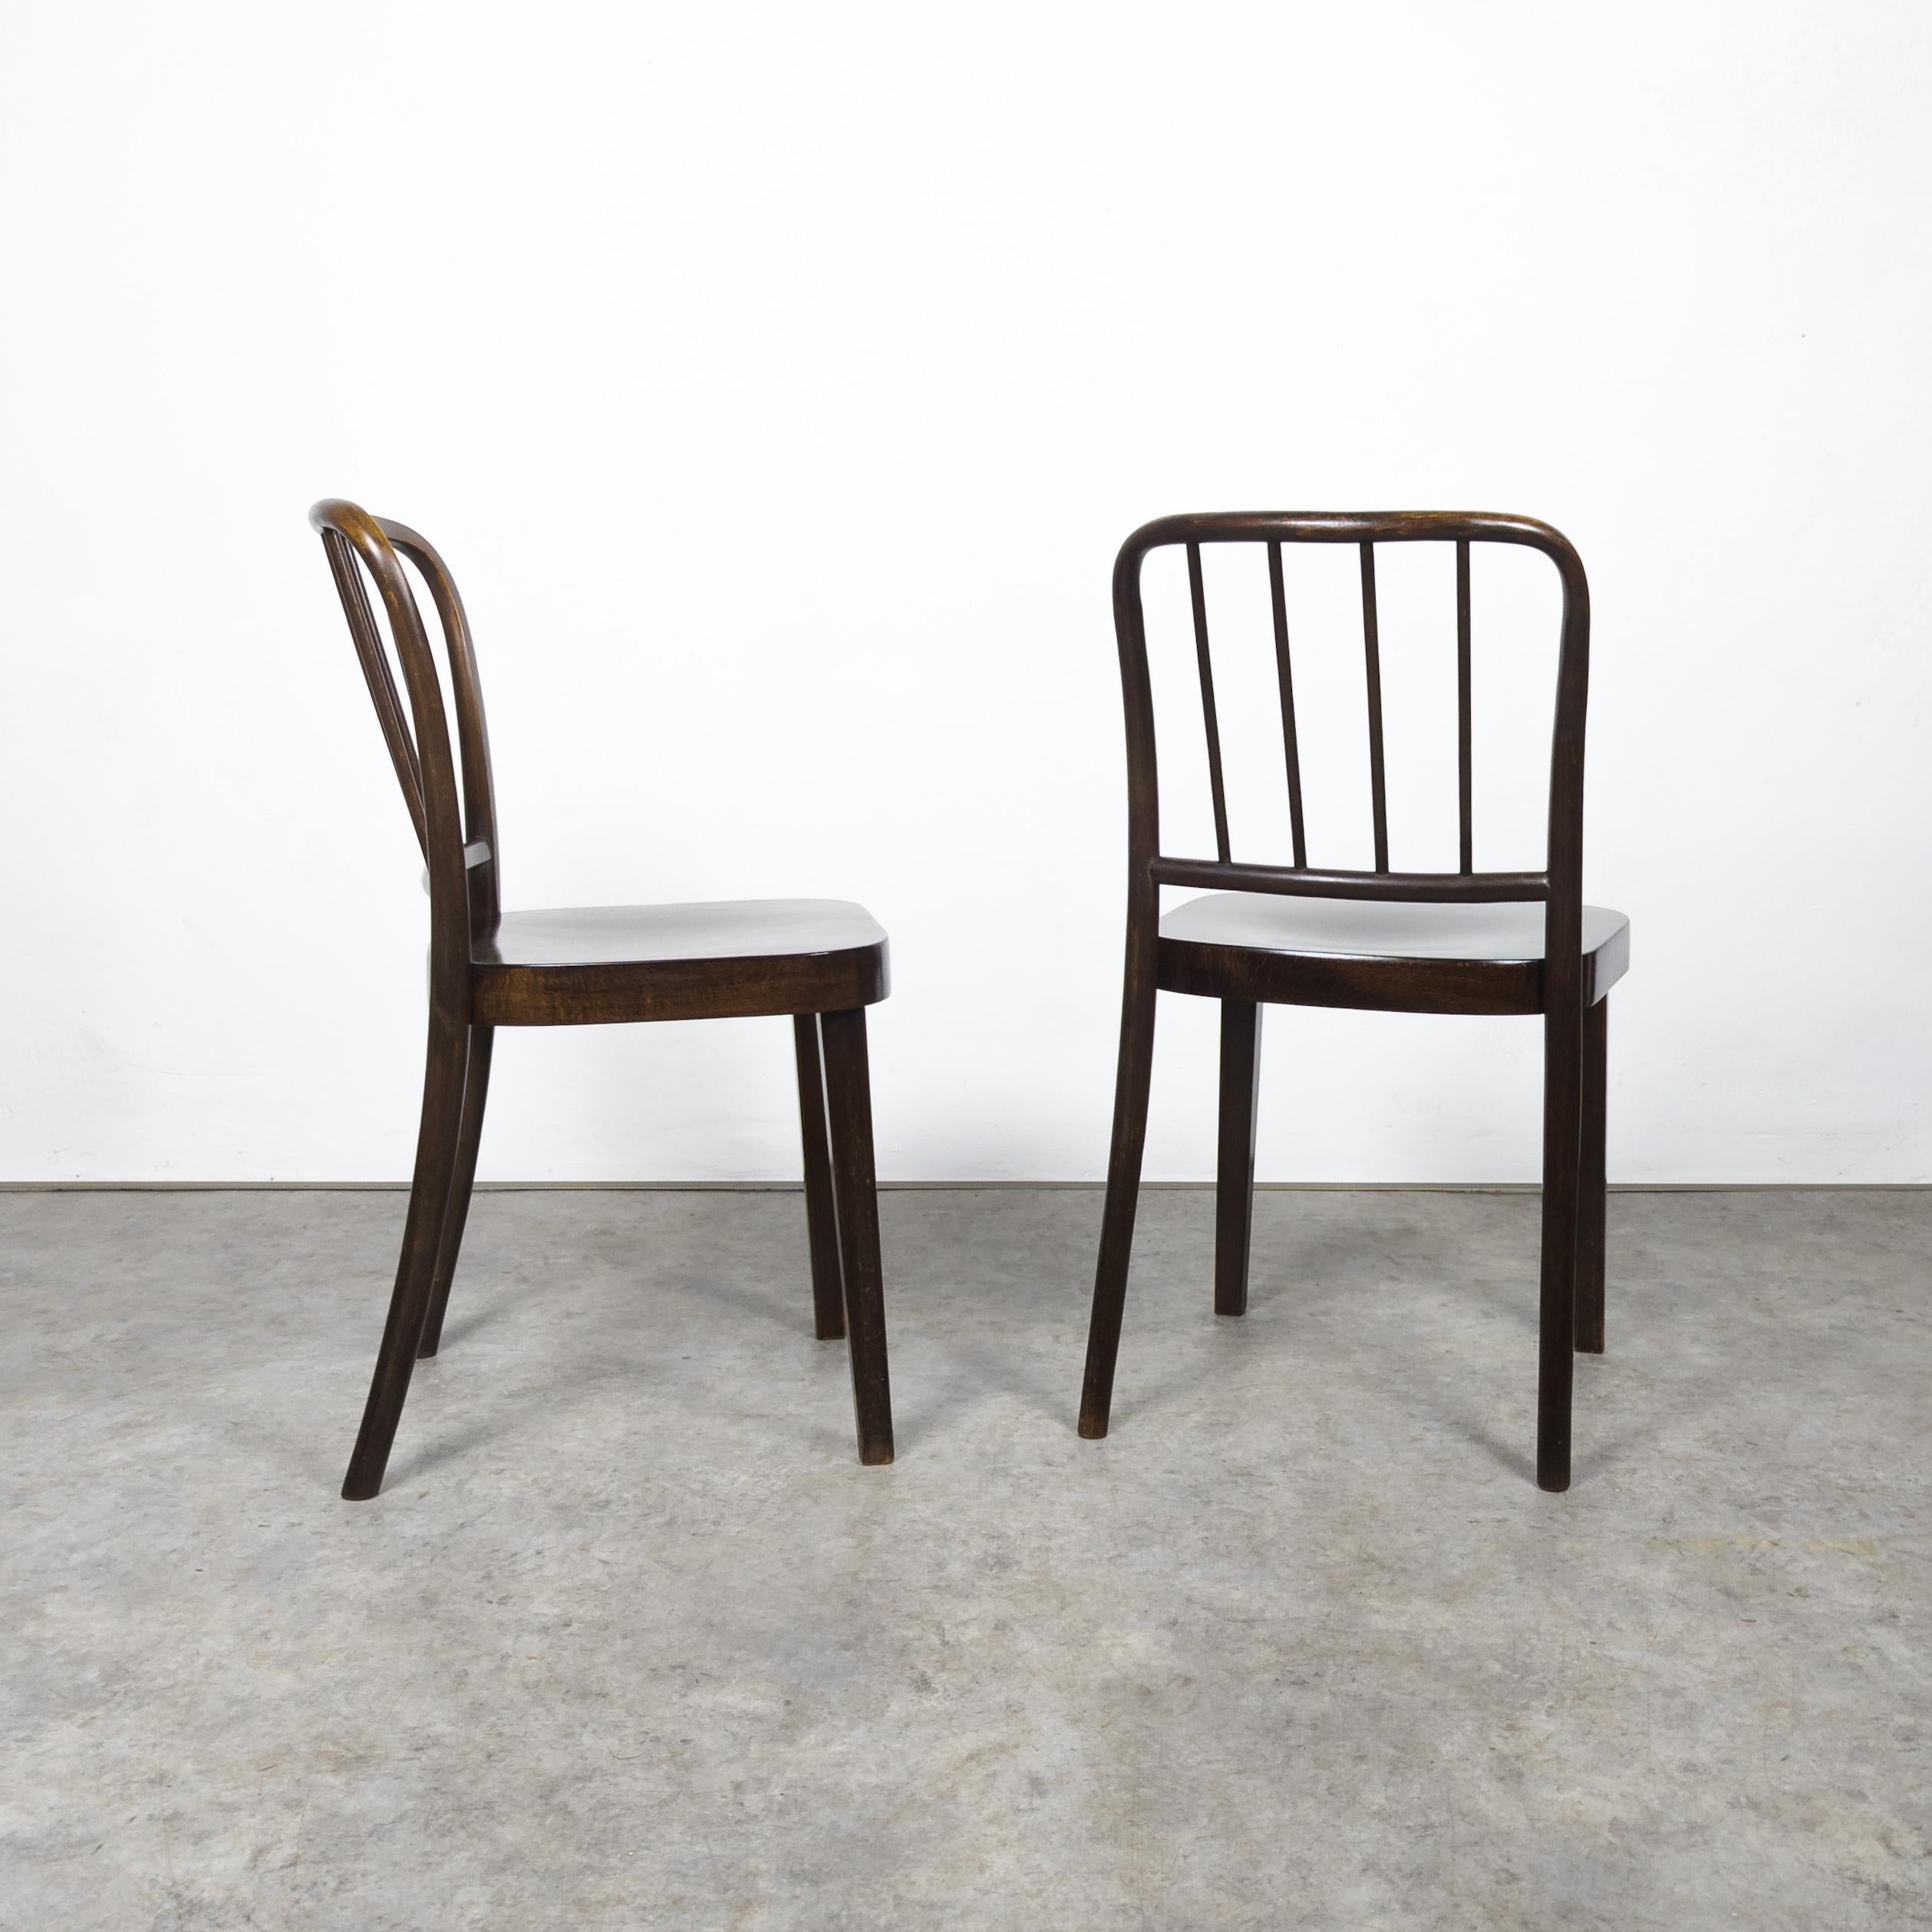 Rare set of four Thonet A 811/4 chairs by Josef Hoffmann For Sale 1